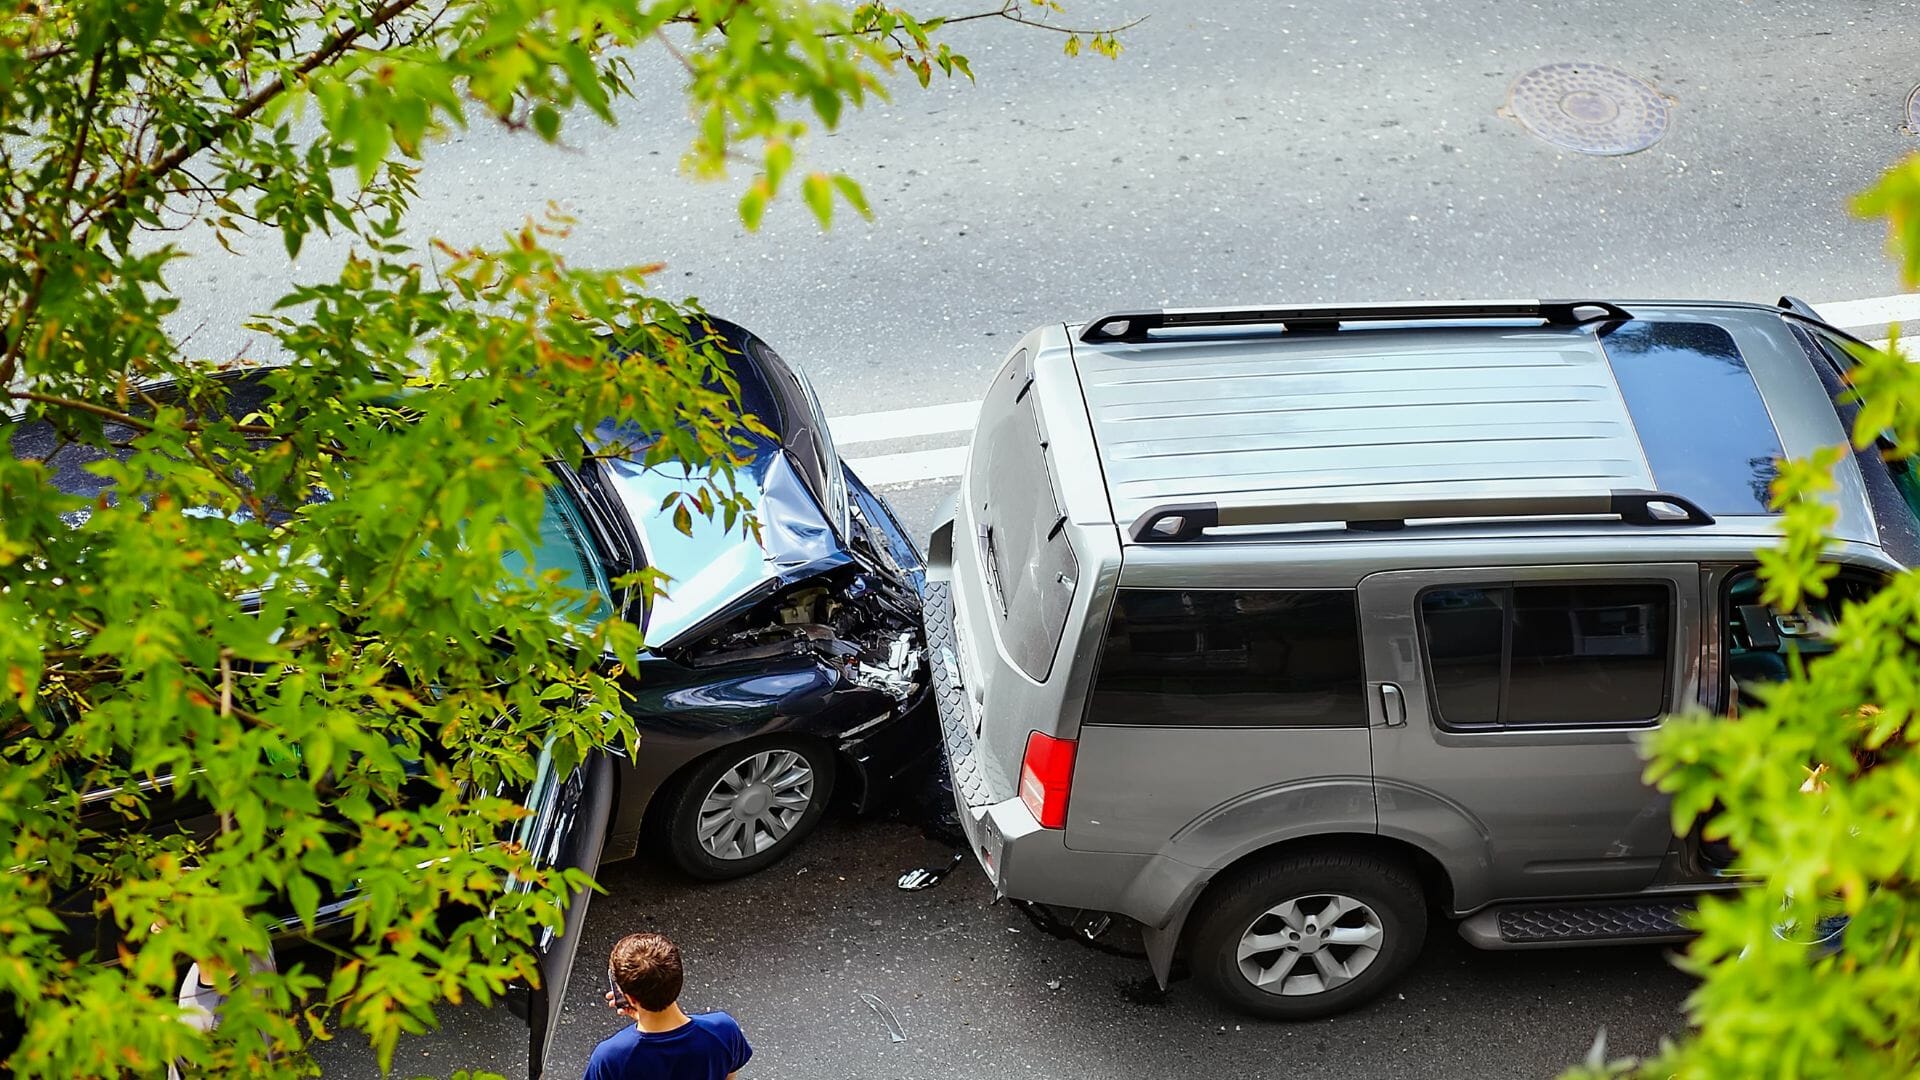 11What to do when someone hits your parked car